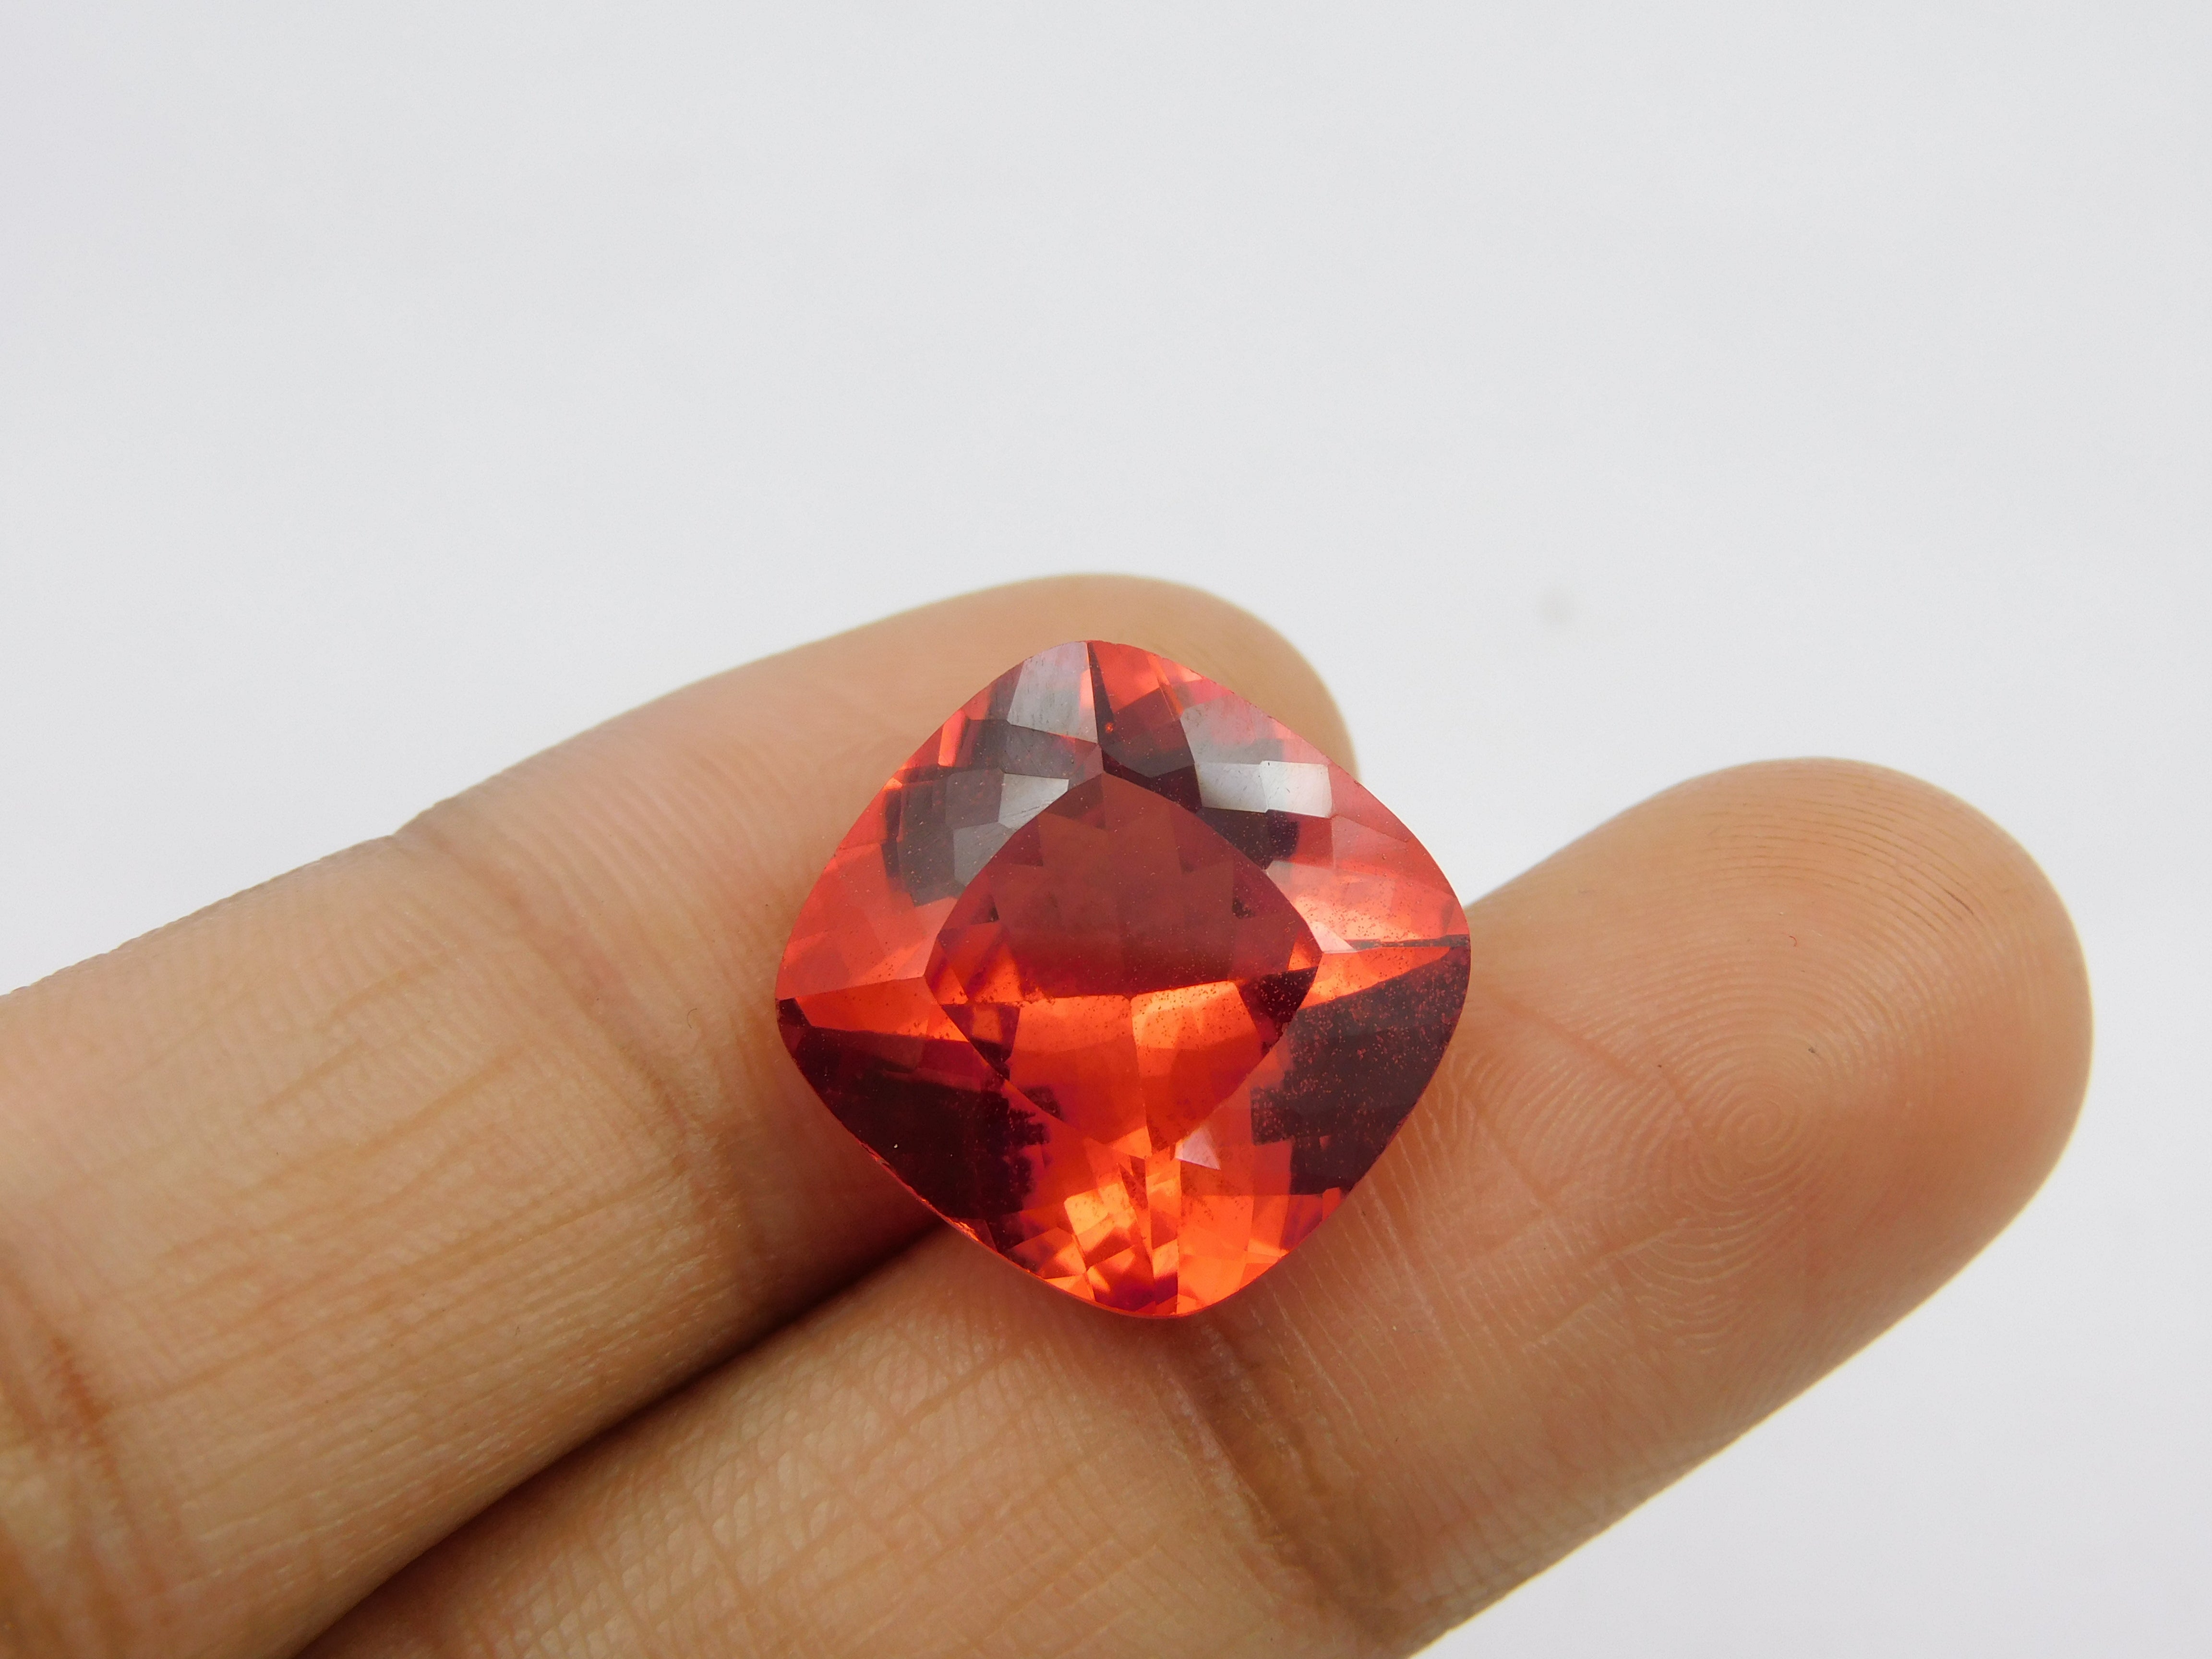 Sapphire Jwelery For Her/ Him | Gift For Her Birthday | 7.65 Carat Orange Color Square Cushion Shape Natural Certified Sapphire Loose Gemstone Free Shipping Free Gift